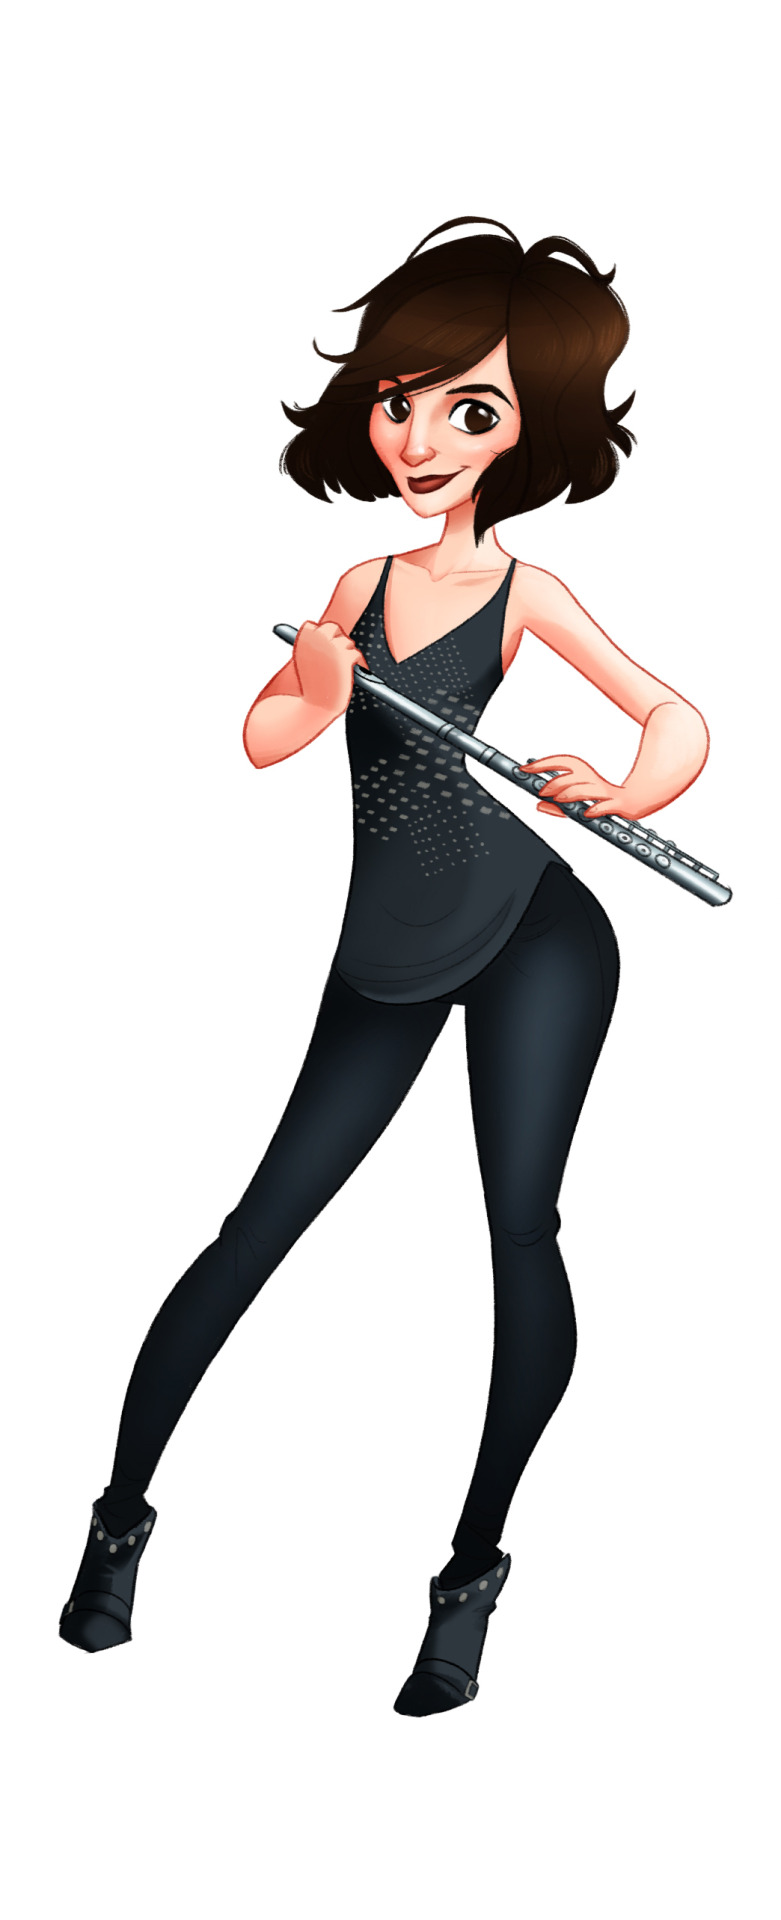 Just finished one of the comissions due Christmas. Flute players ladies :D